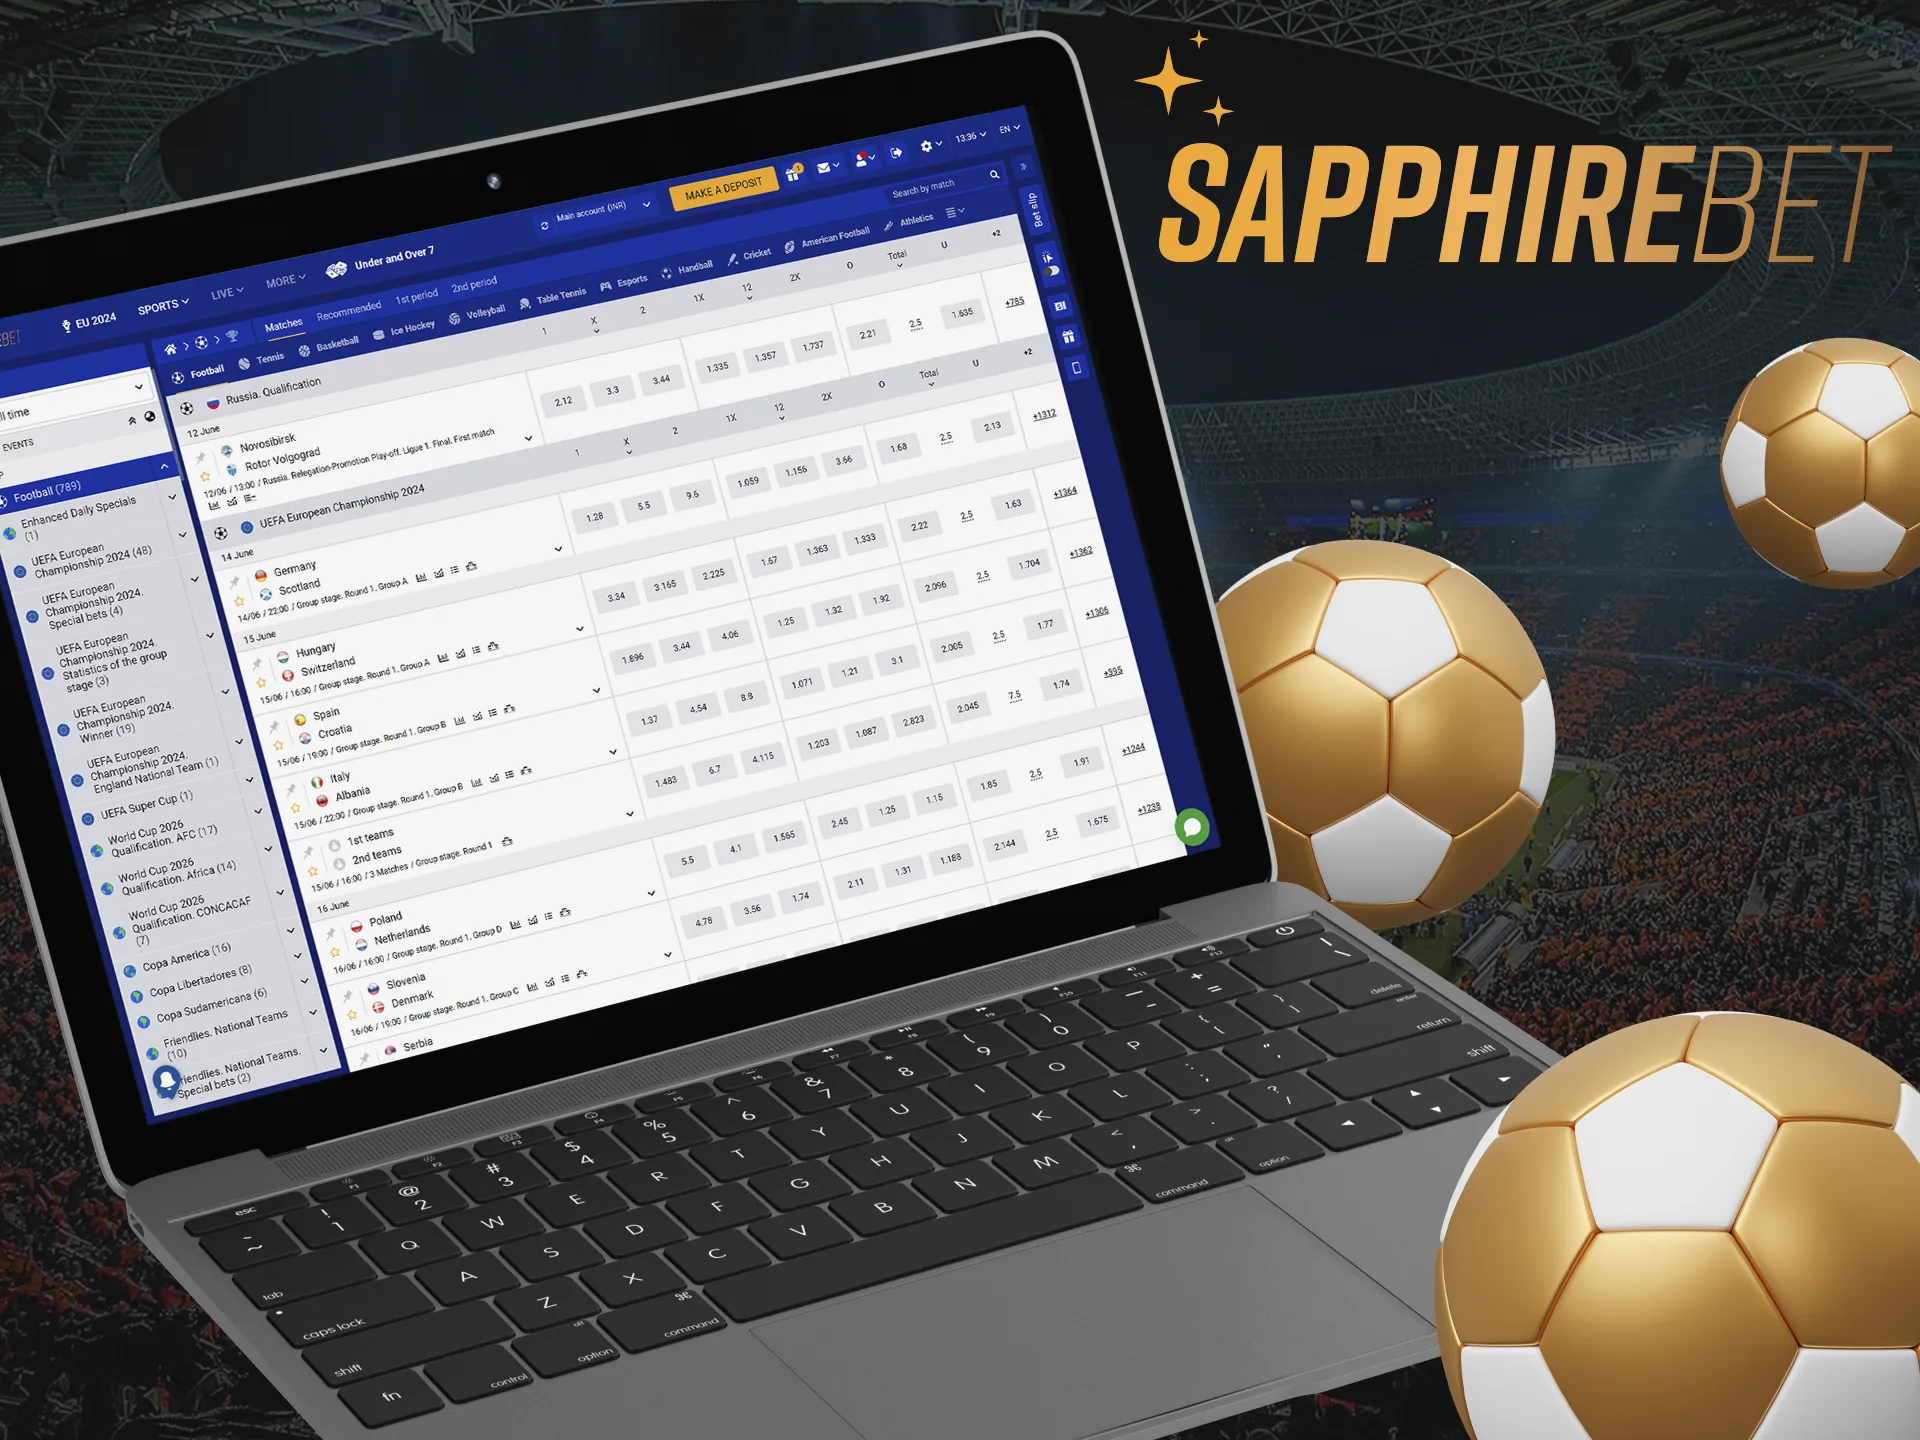 Go to the sports section on SapphireBet to find the football event you need.